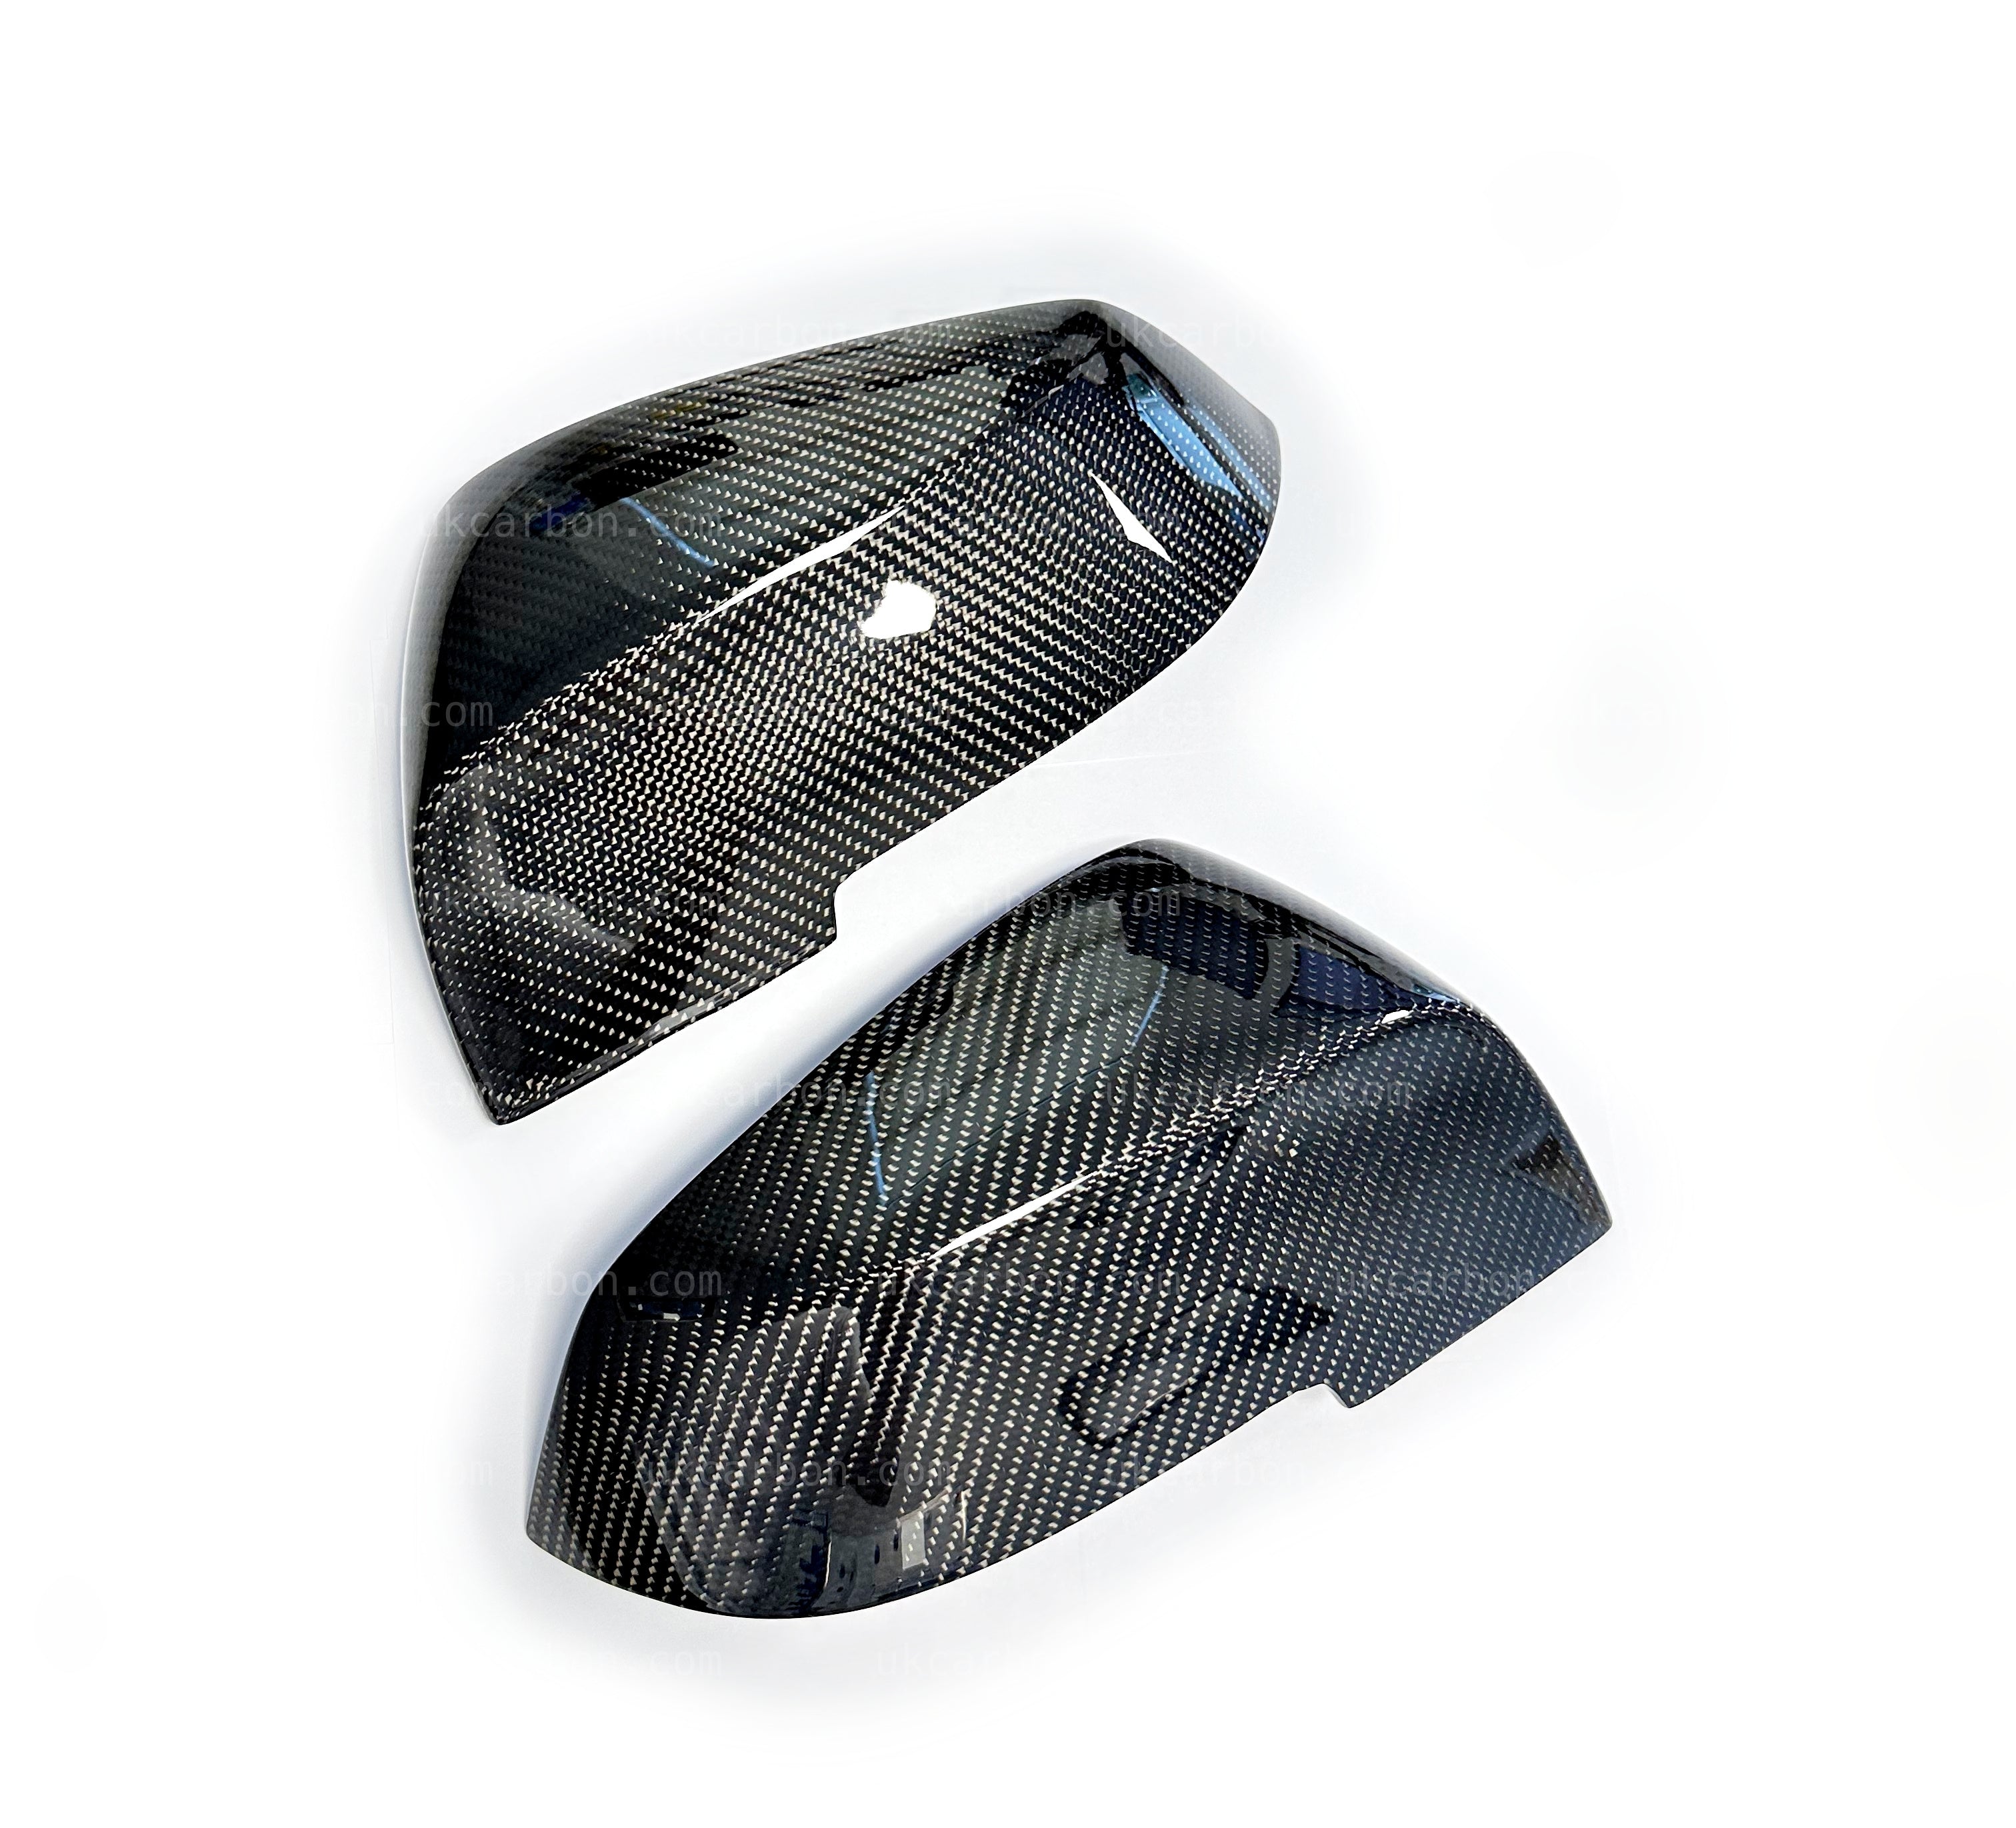 BMW 4 Series Carbon M Performance Wing Mirror Cover Replacements F32 by UKCarbon